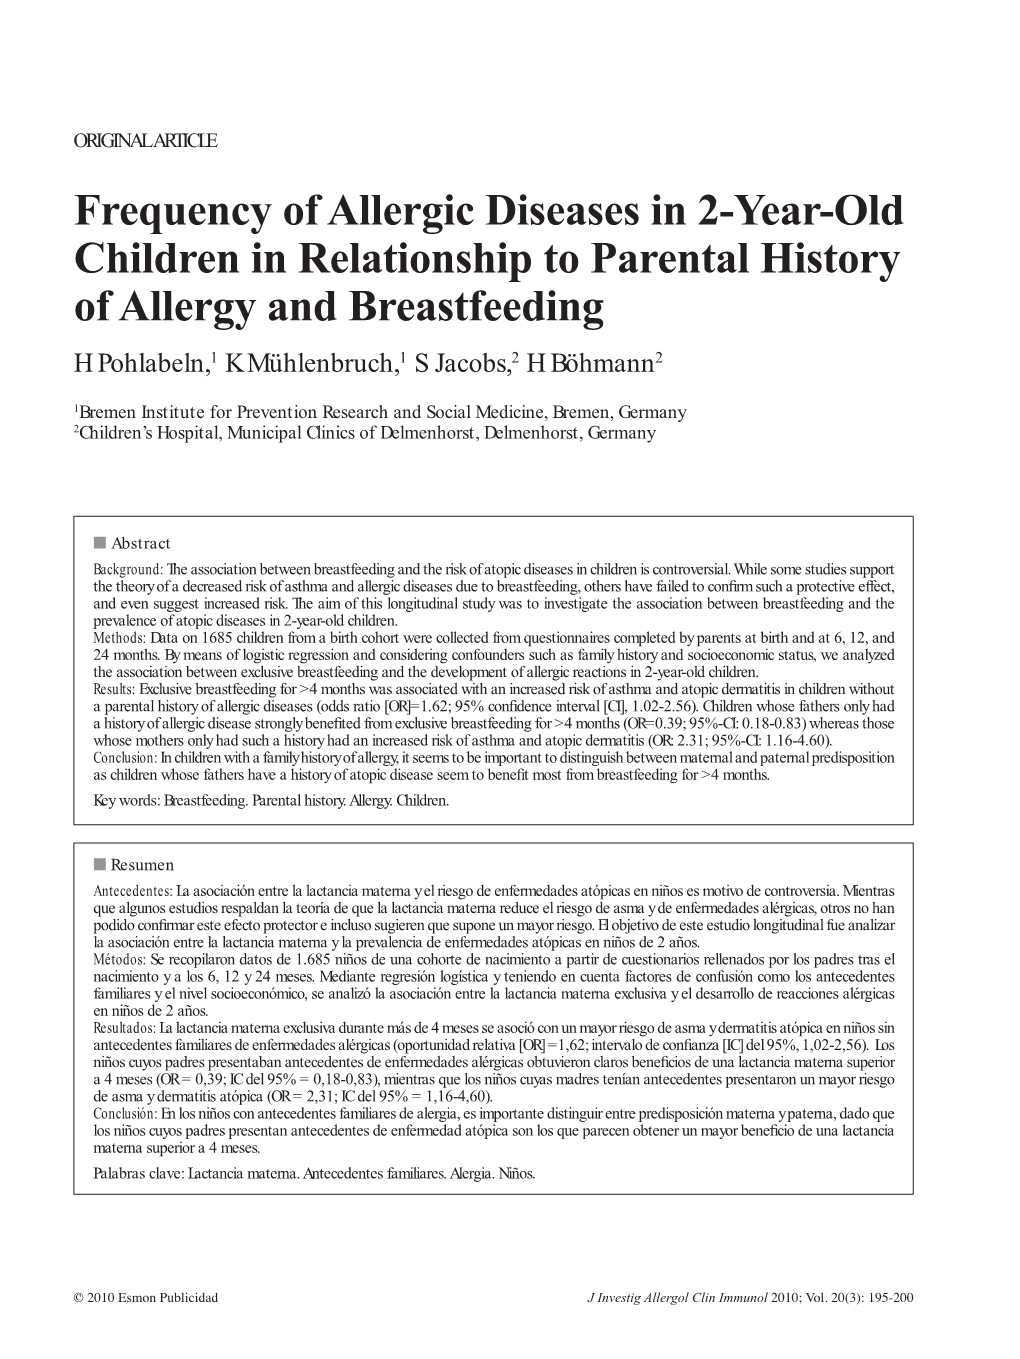 Frequency of Allergic Diseases in 2-Year-Old Children in Relationship